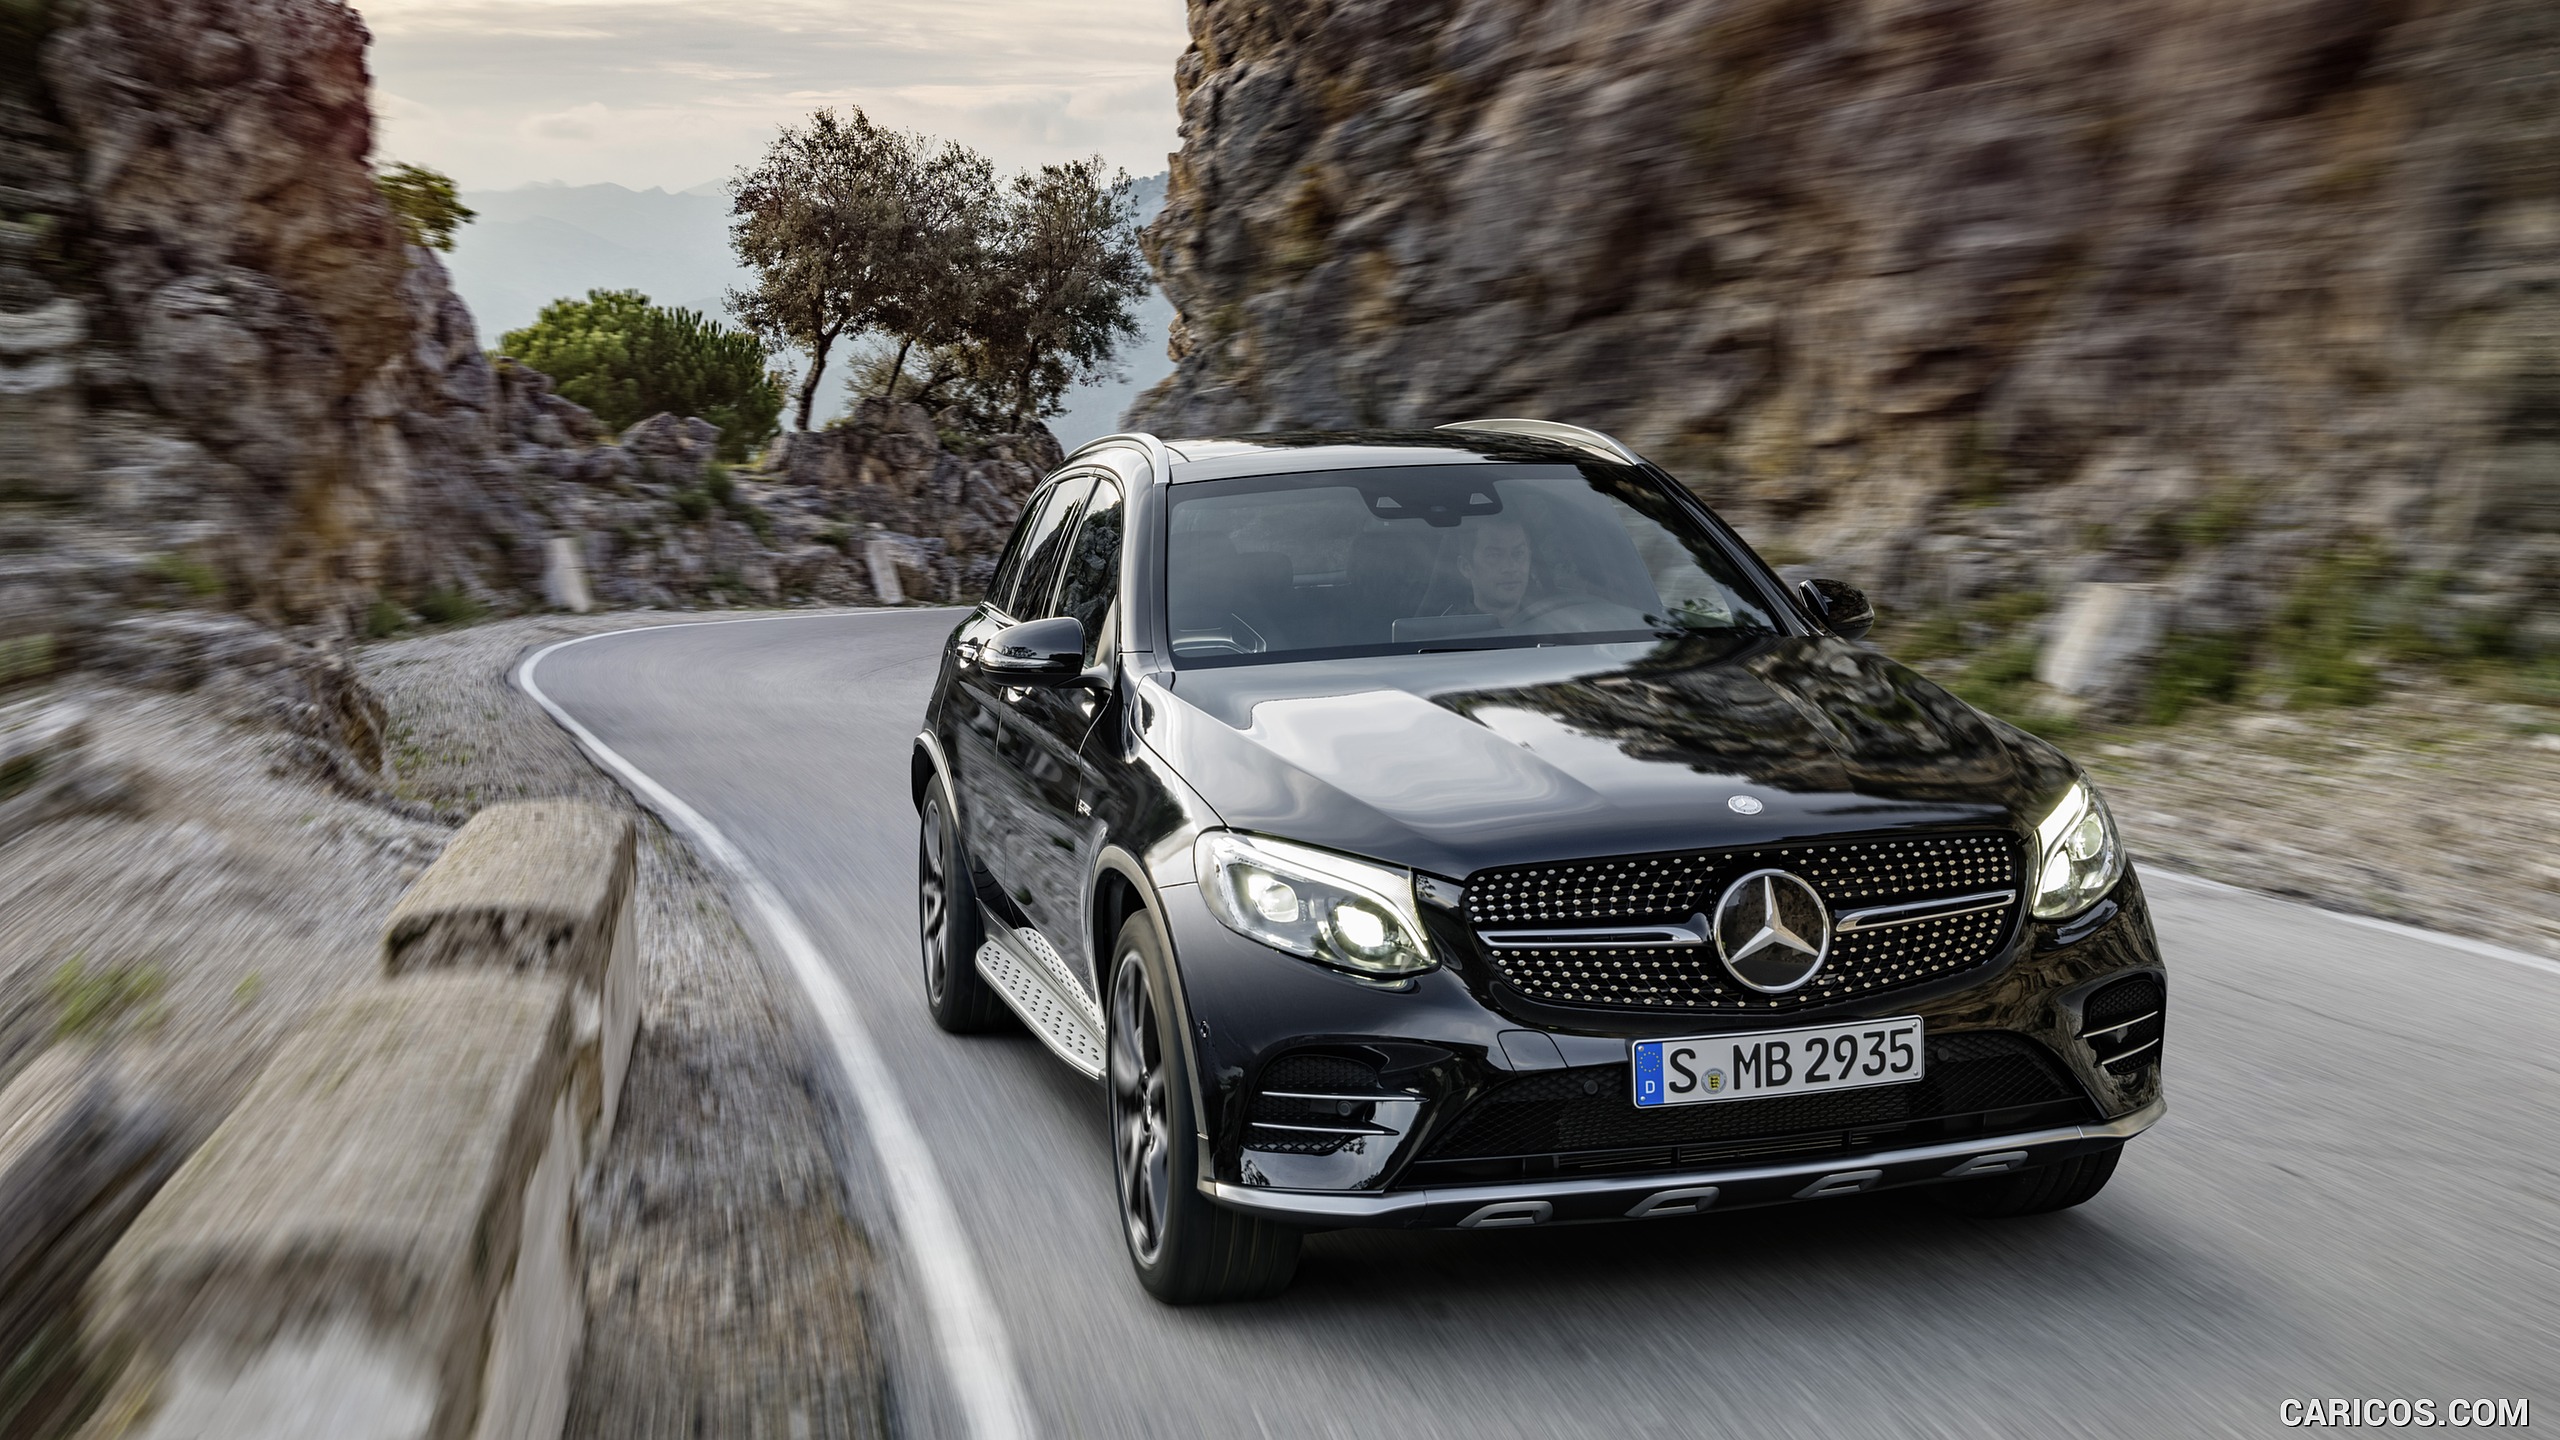 2017 Mercedes-AMG GLC 43 4MATIC (Chassis: X253, Color: Obsidian Black) - Front, #8 of 108